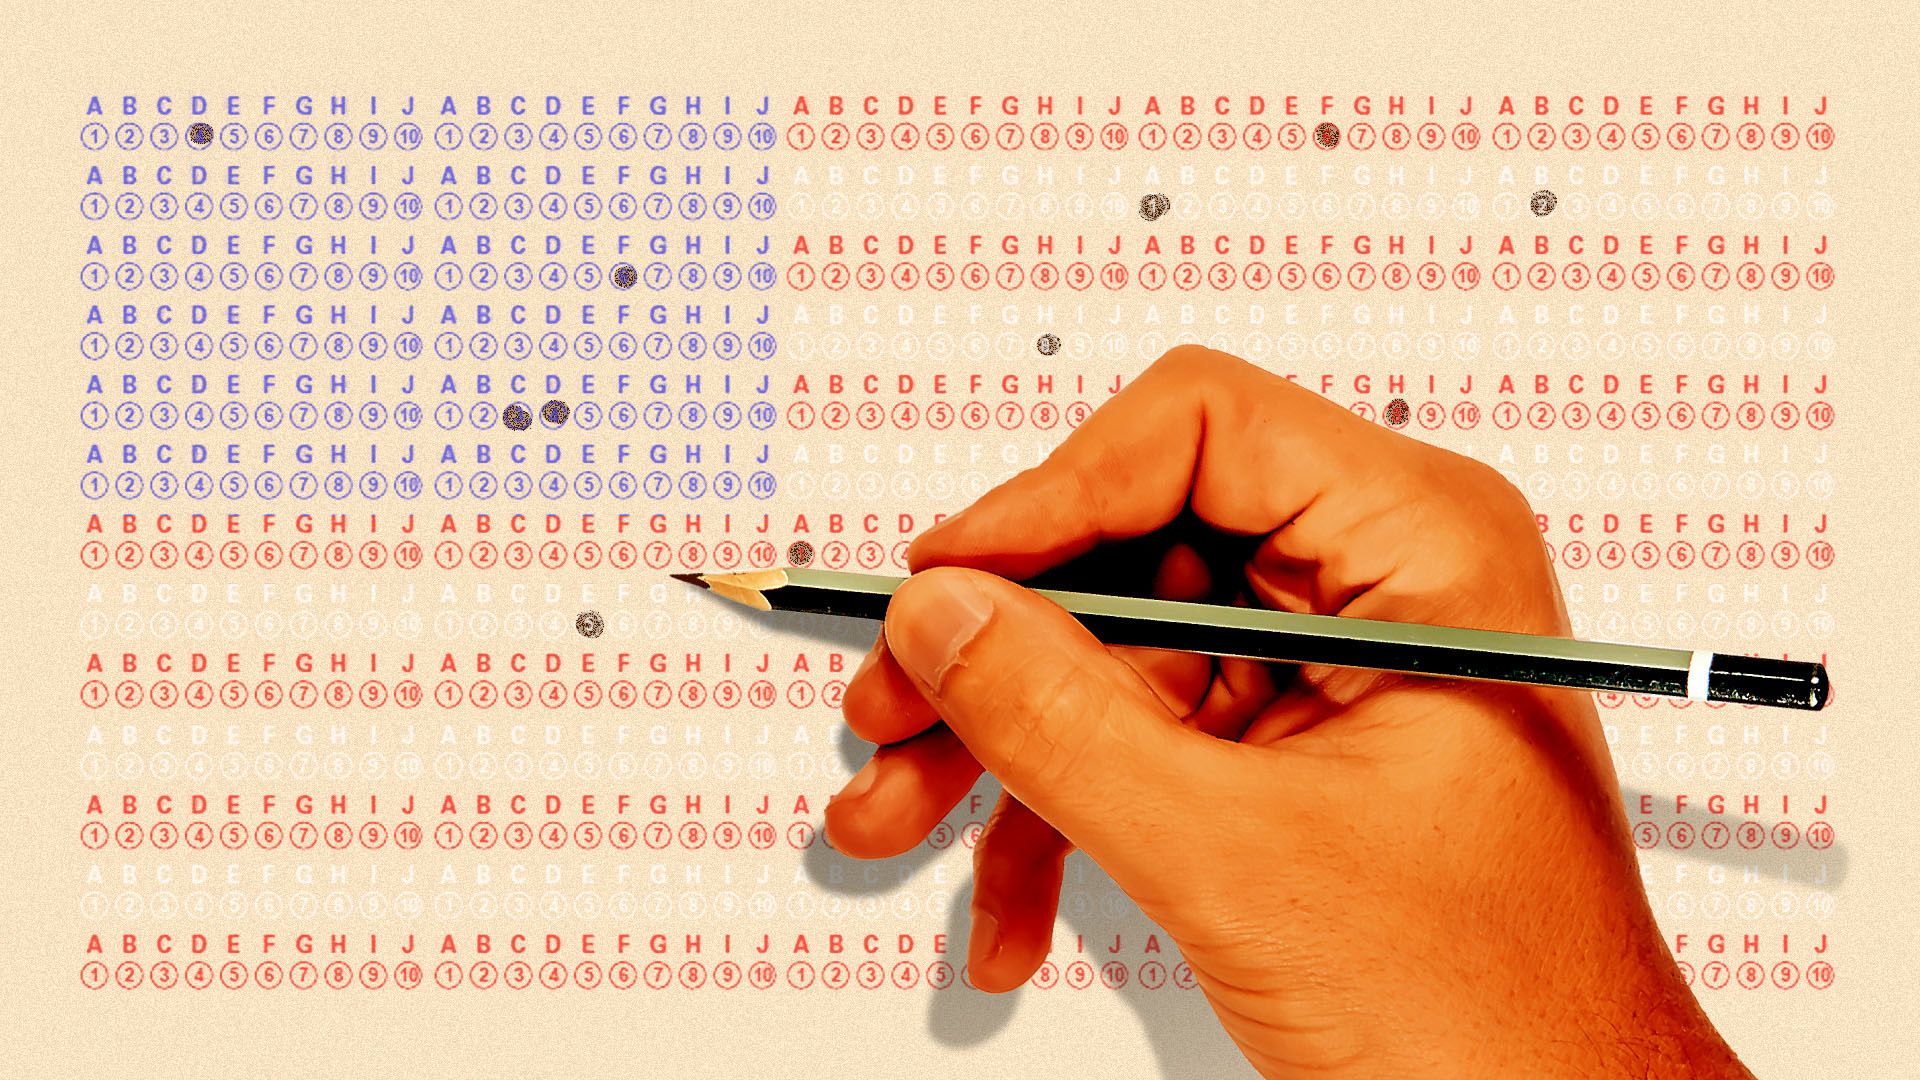 Illustration of hand writing on form.